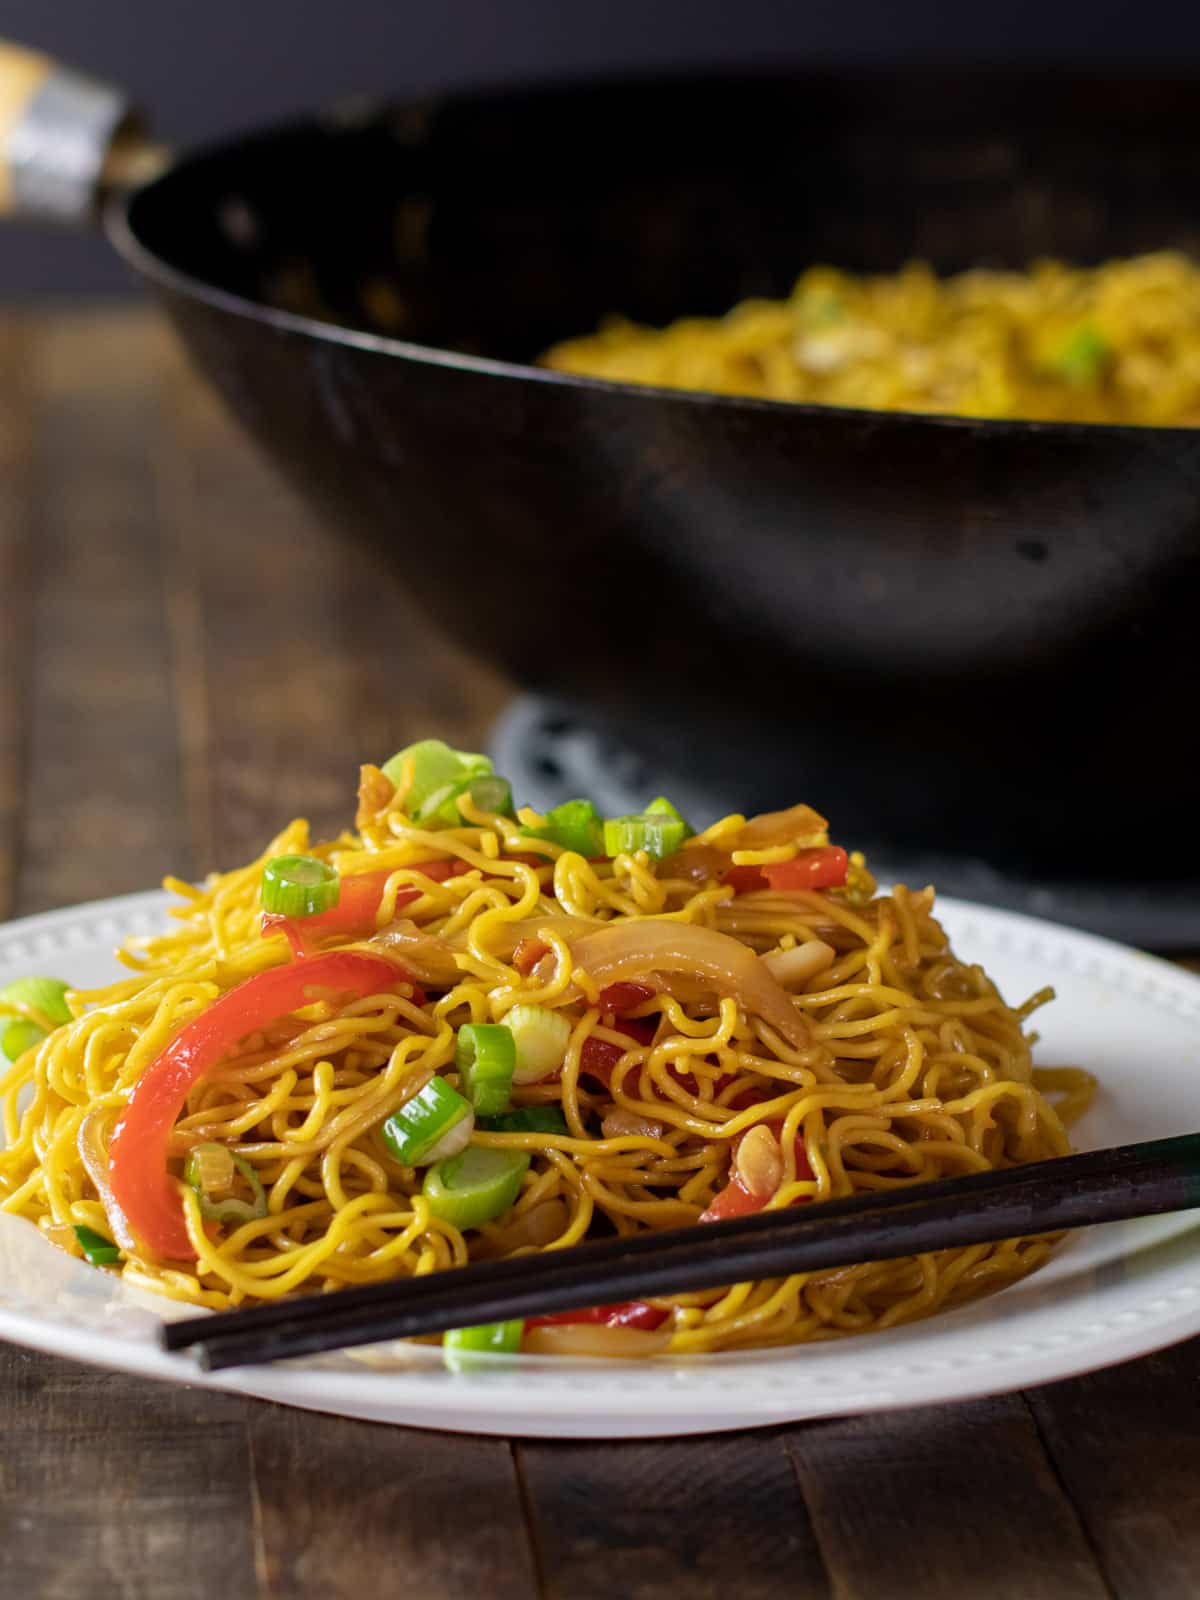 Chow mein noodles on a plate with chop sticks.